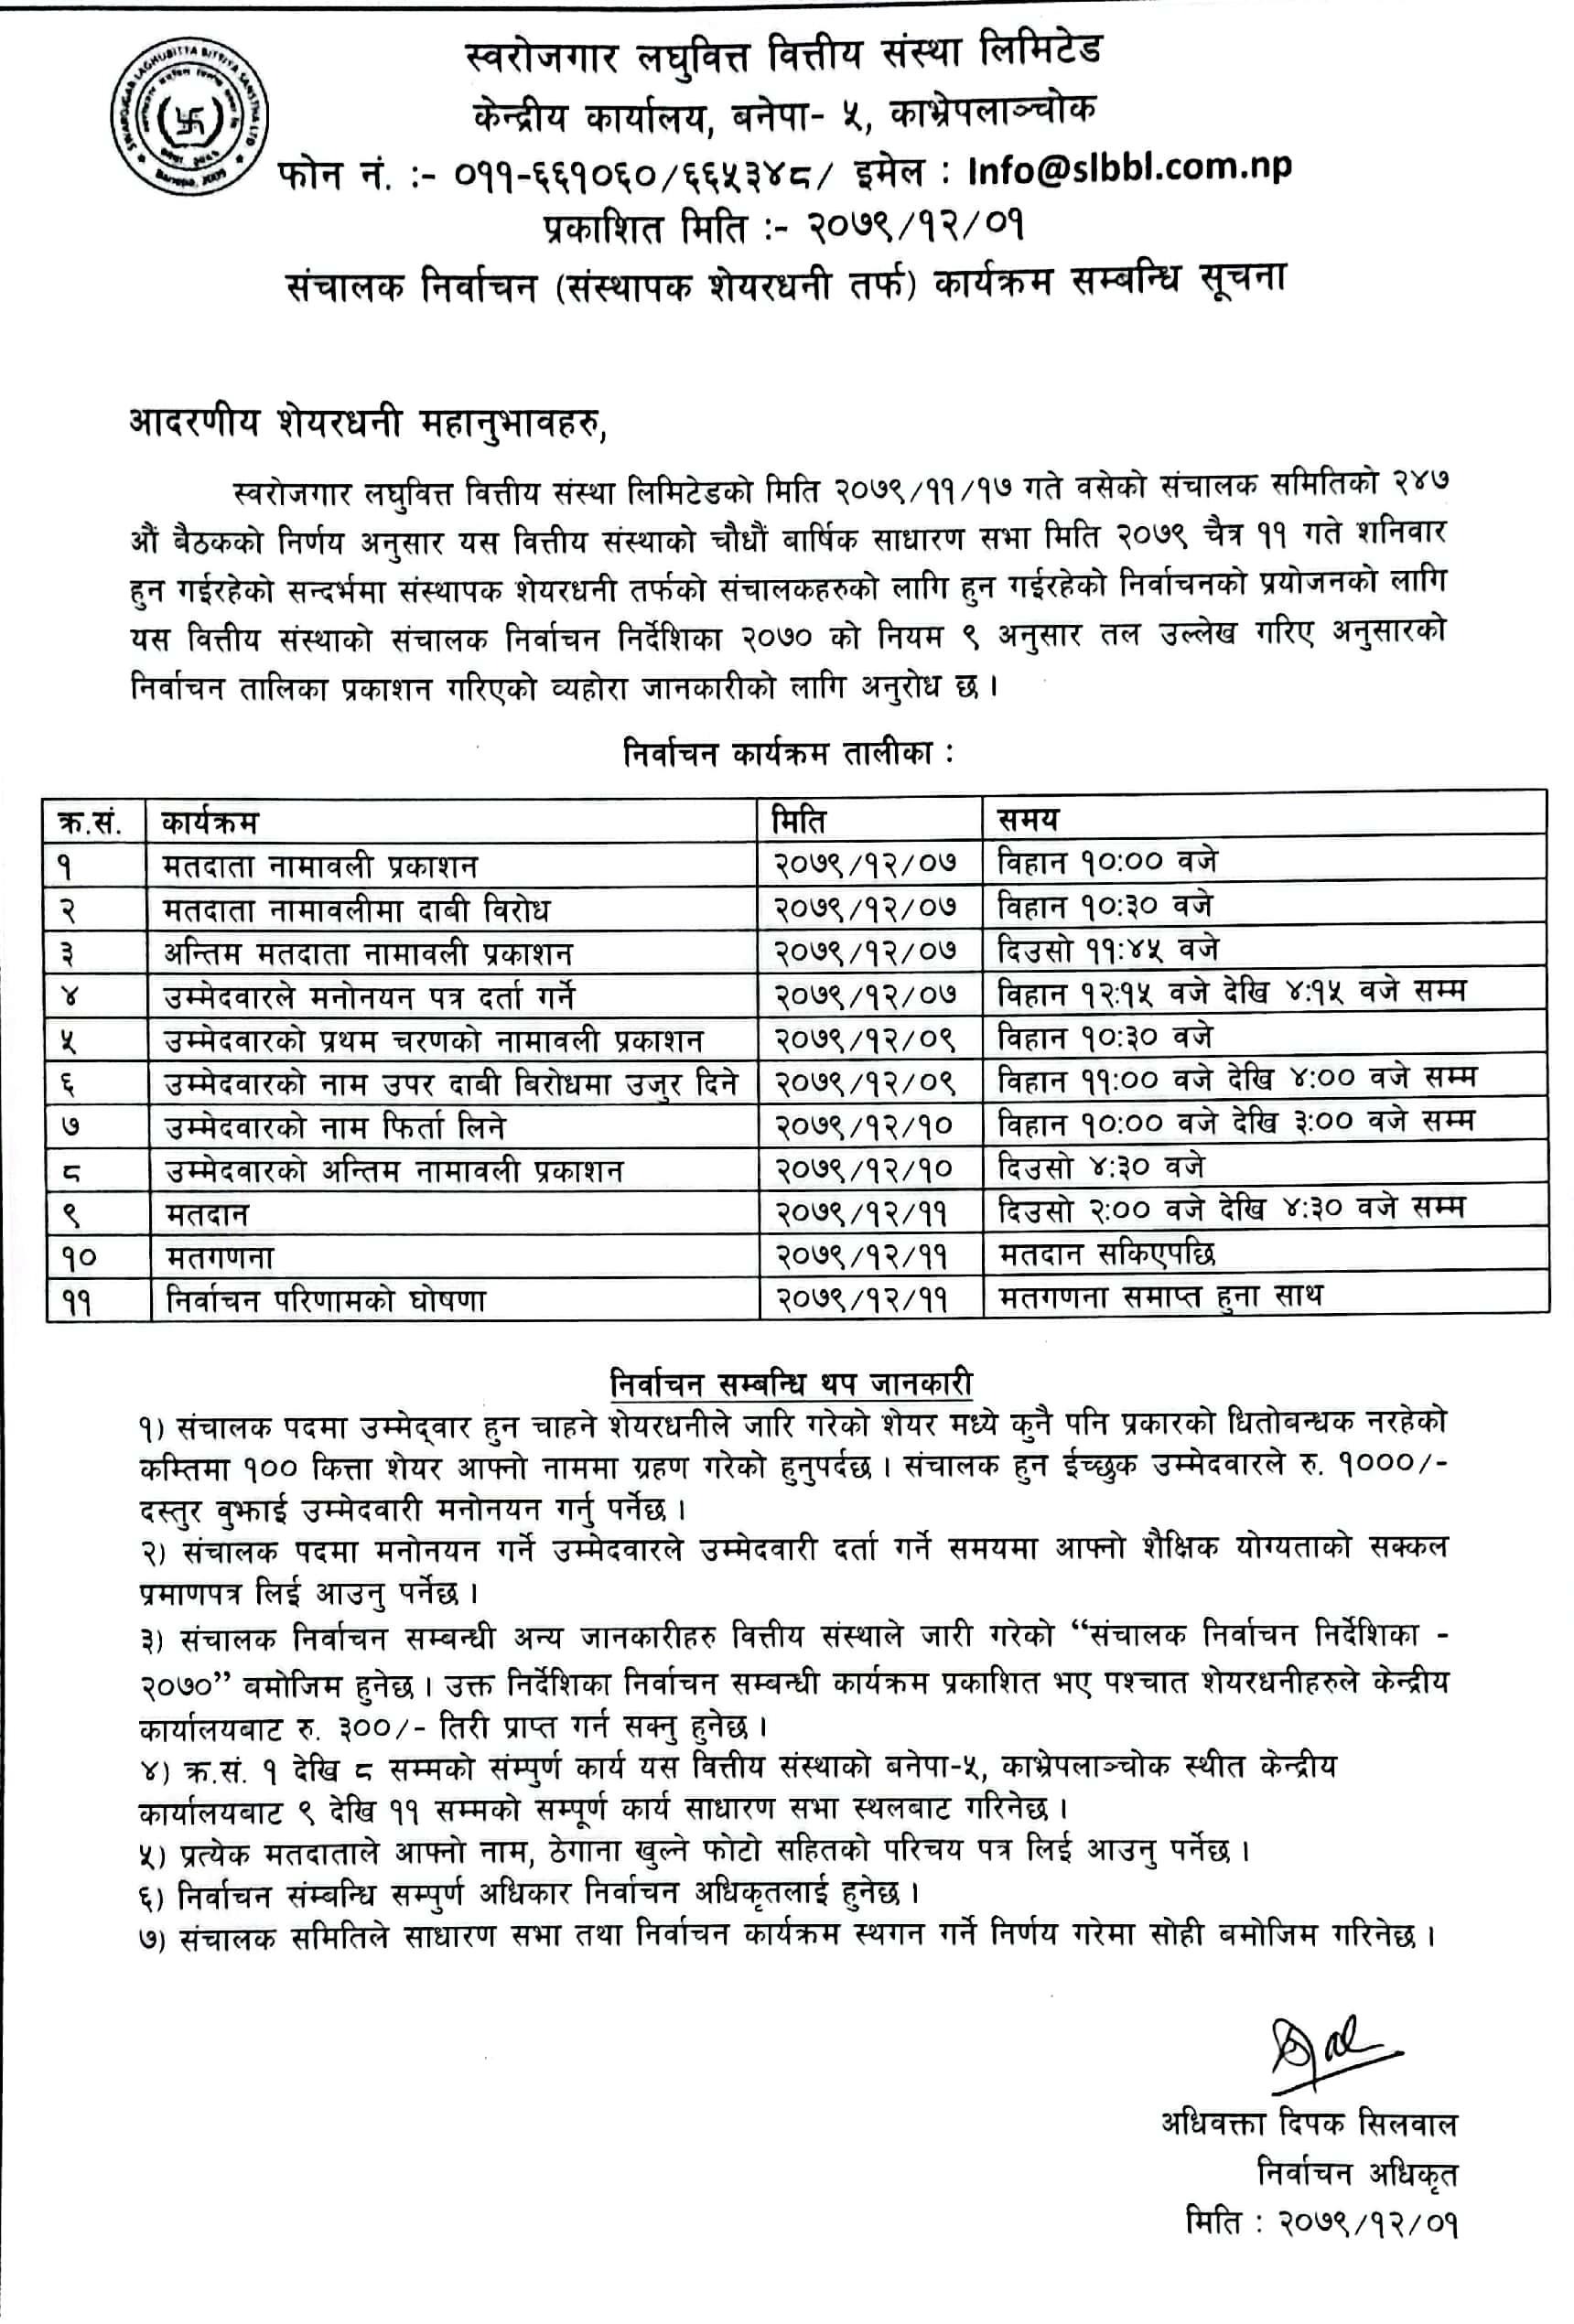 Election Schedule for BOD Election (Promoter Group) 2079.12.01